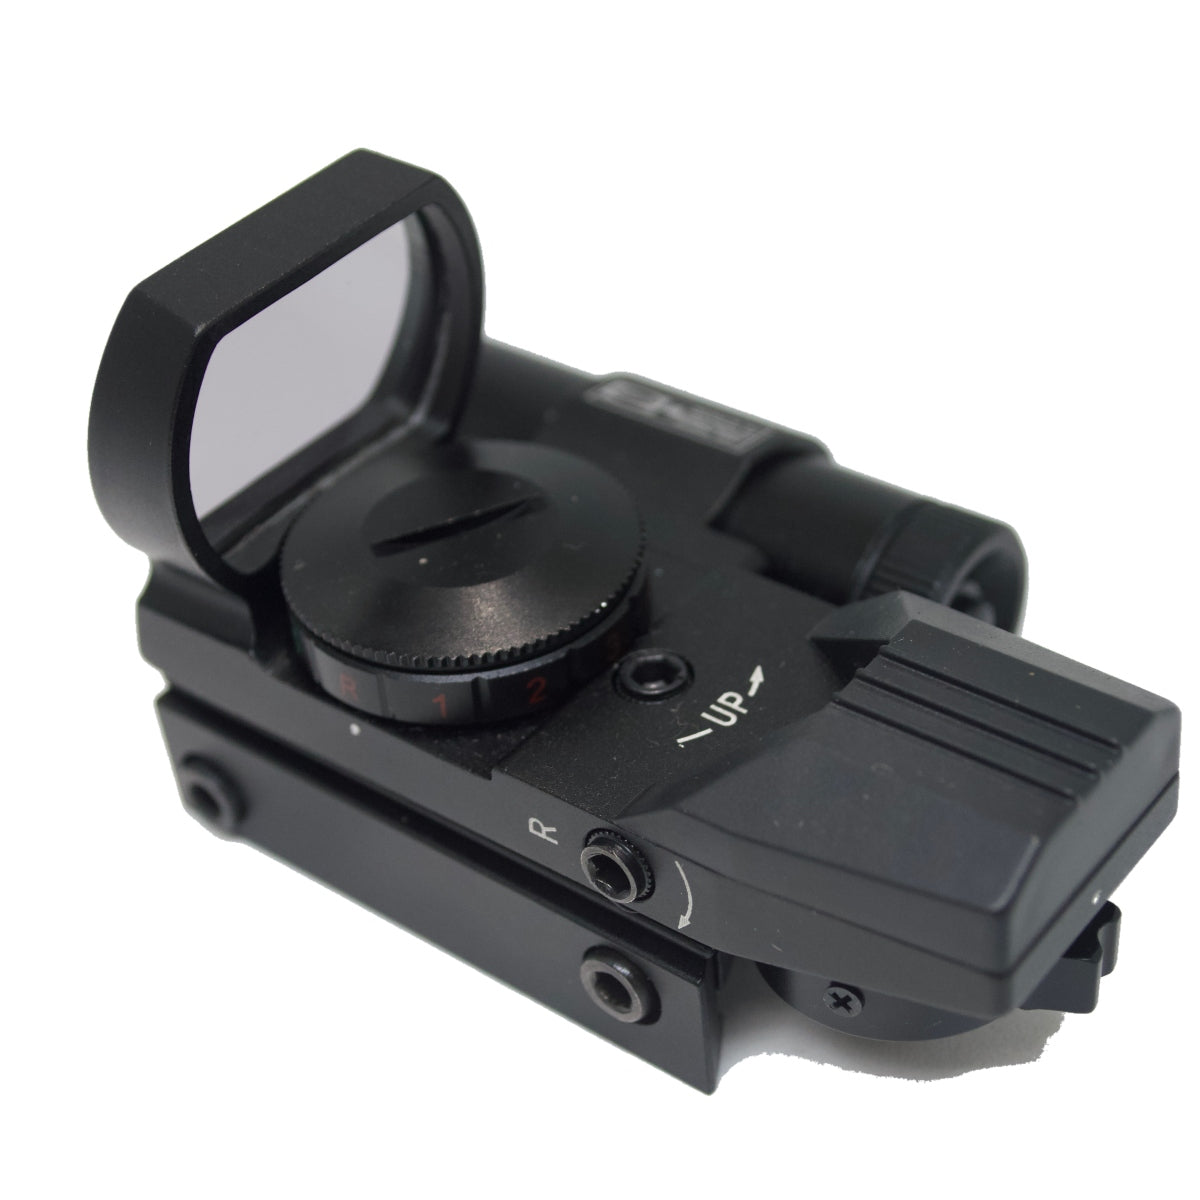 Red Infrared Scope - AH Tactical 